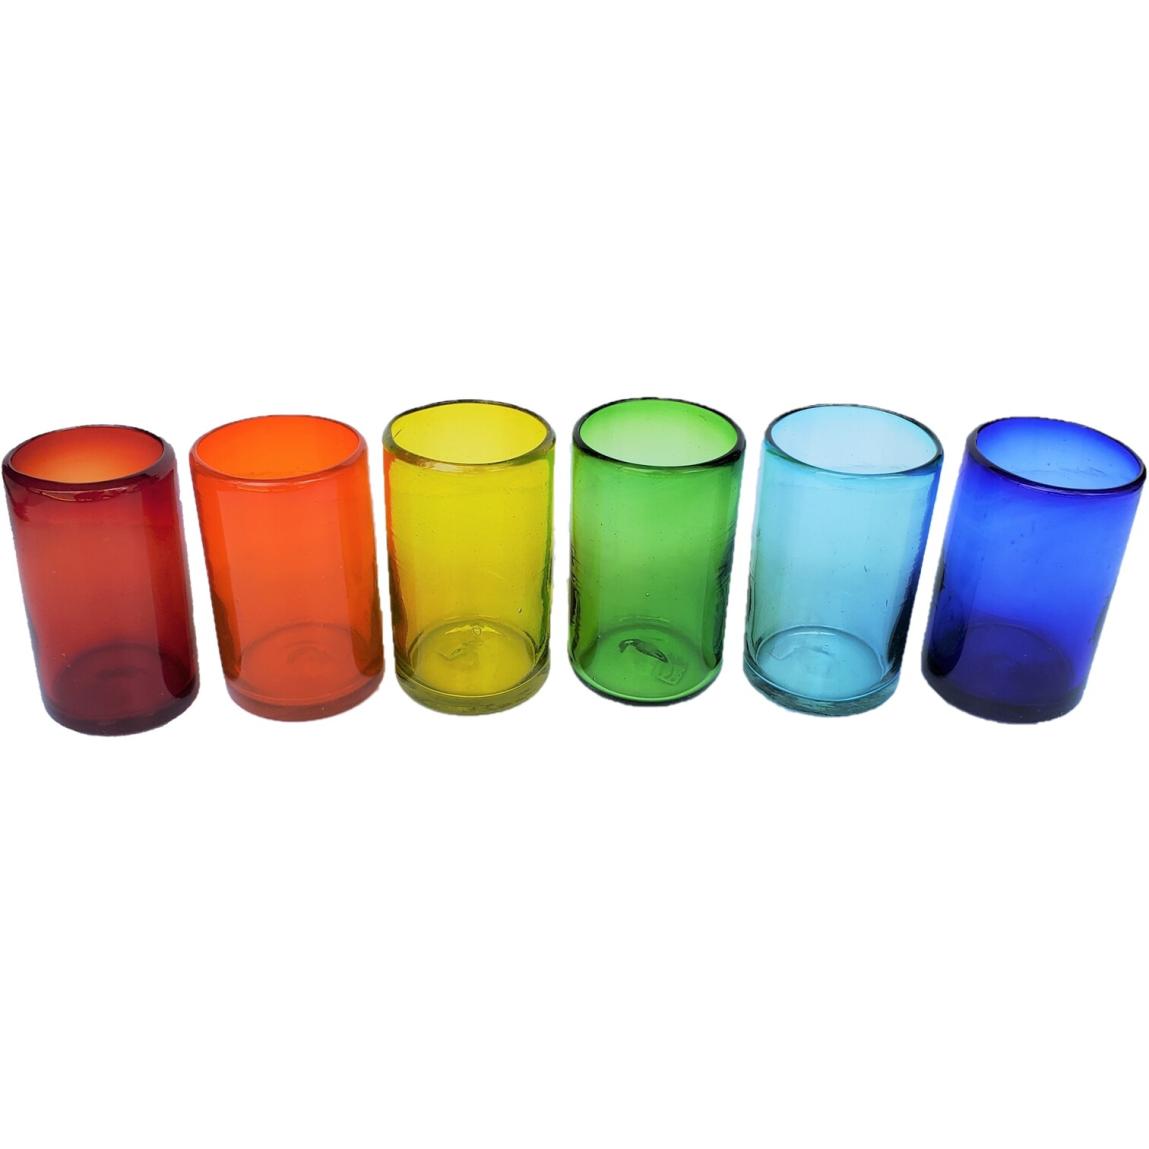 MEXICAN GLASSWARE / Rainbow Colored 14 oz Drinking Glasses (set of 6) / These handcrafted glasses deliver a classic touch to your favorite drink.